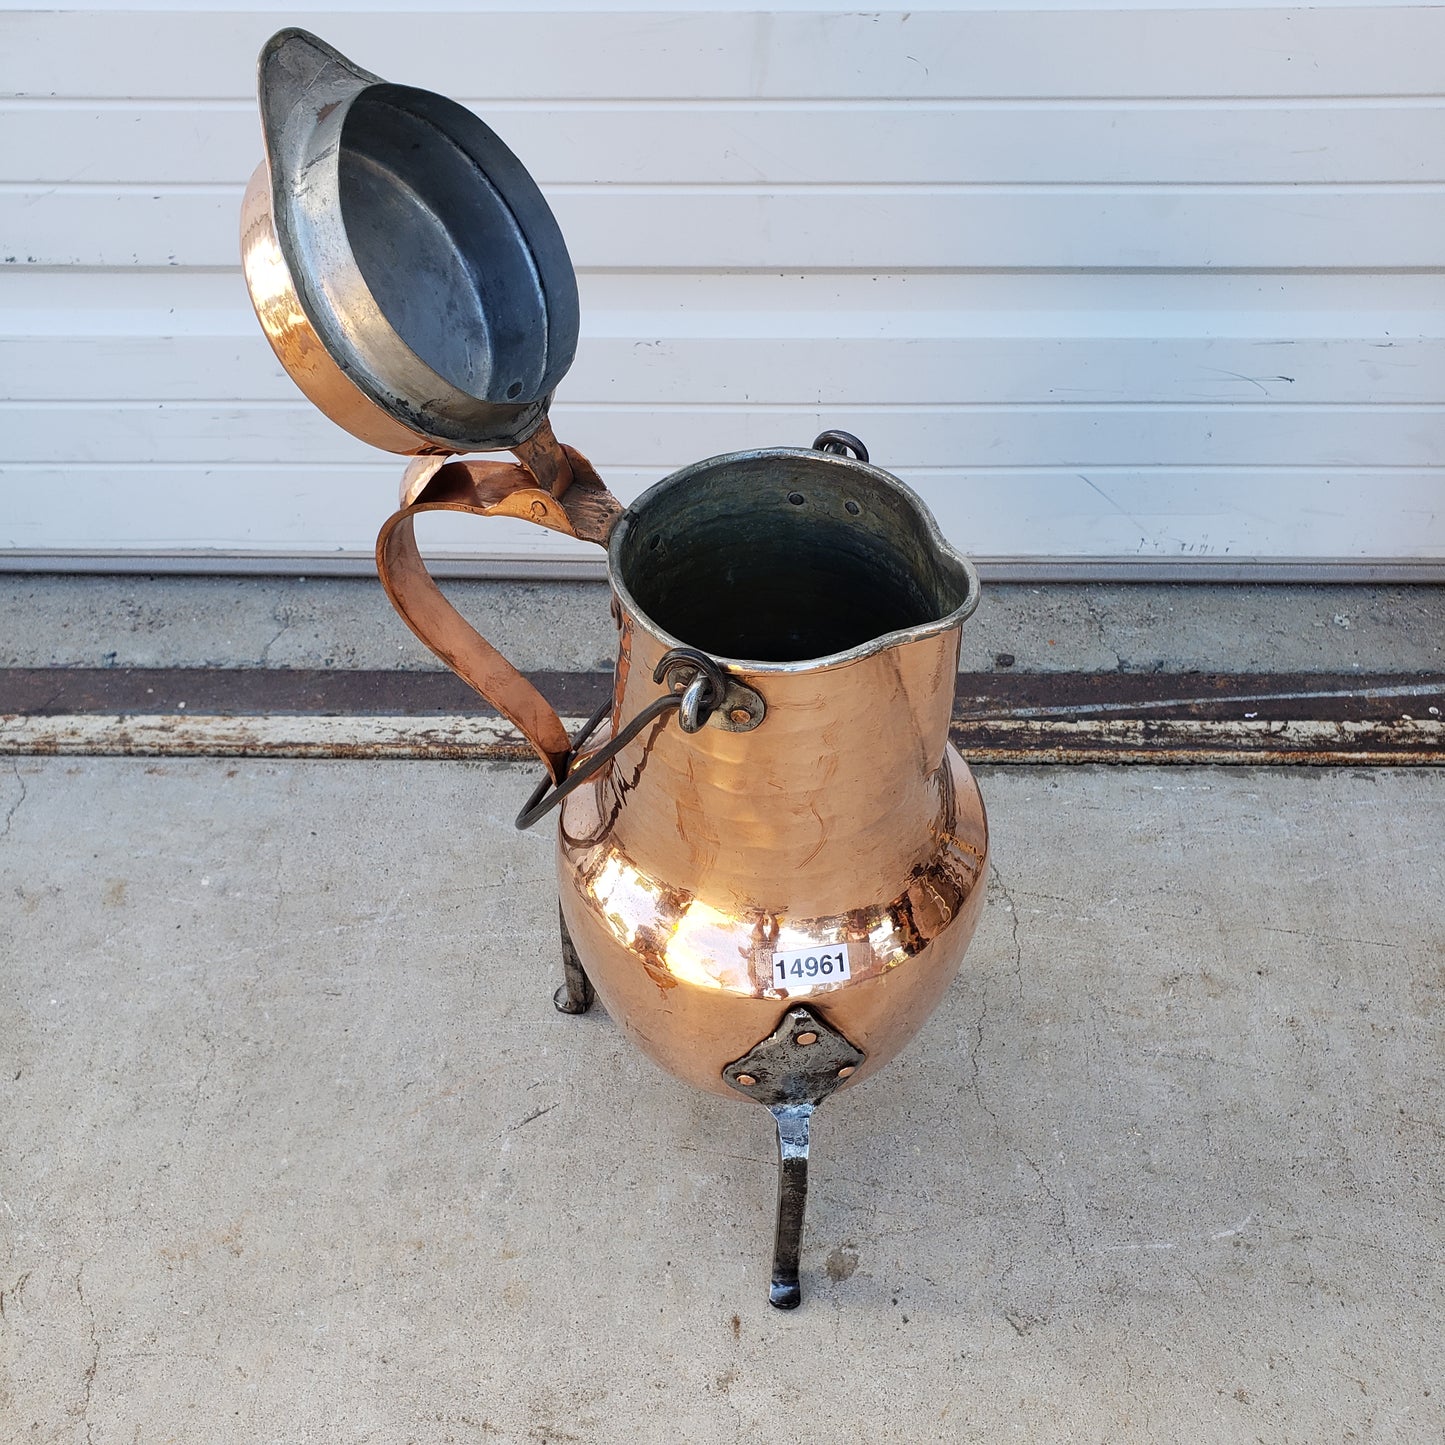 Large French Antique Copper Hot Chocolate Kettle